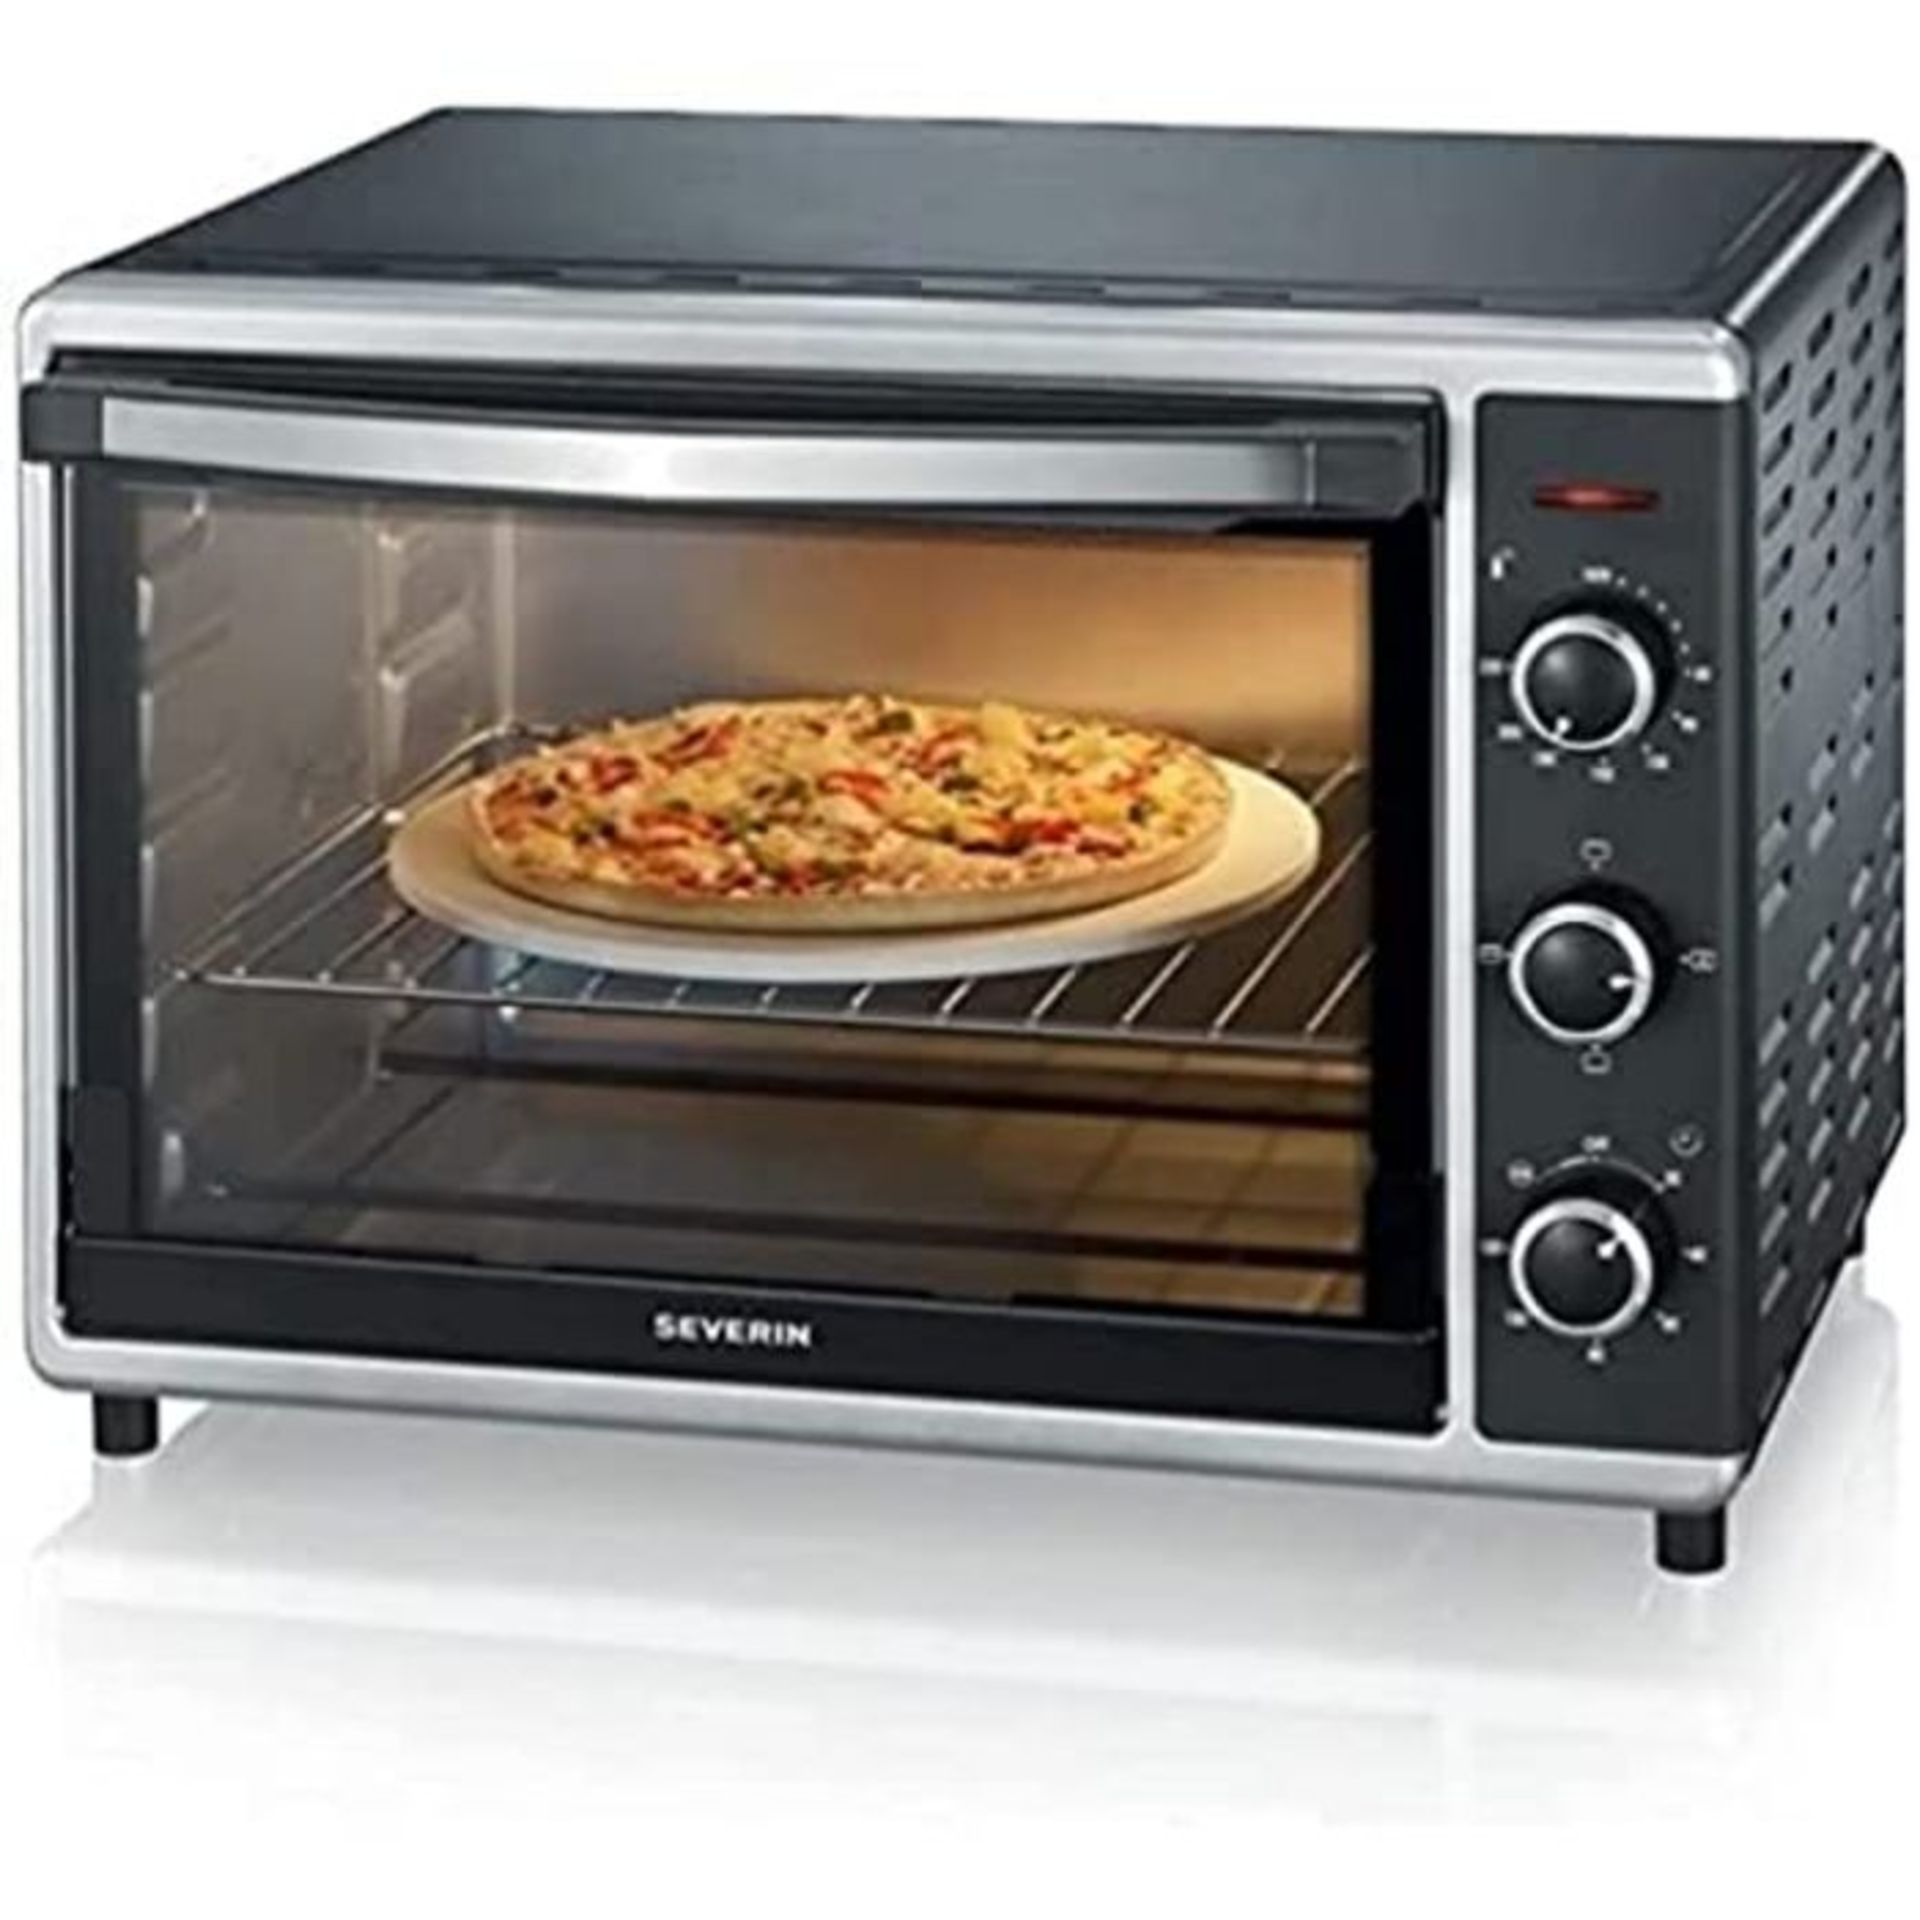 RRP £117.00 Severin Mini electric oven with hot air function and with 1800 W of power 2058, black - Image 4 of 6